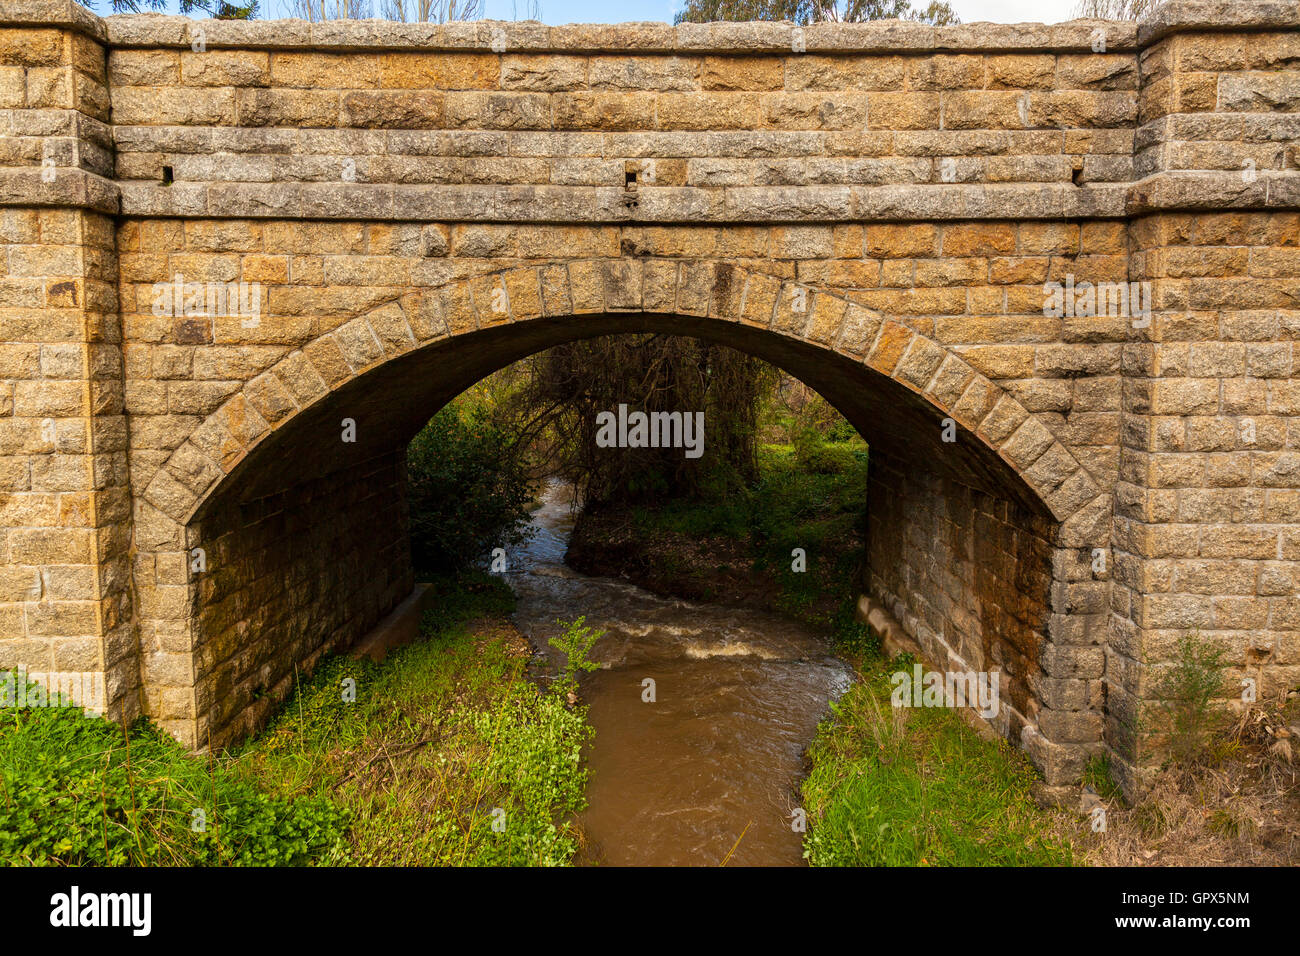 Stone bridge, hand carved stone bricks, water flowing, arched structure Stock Photo